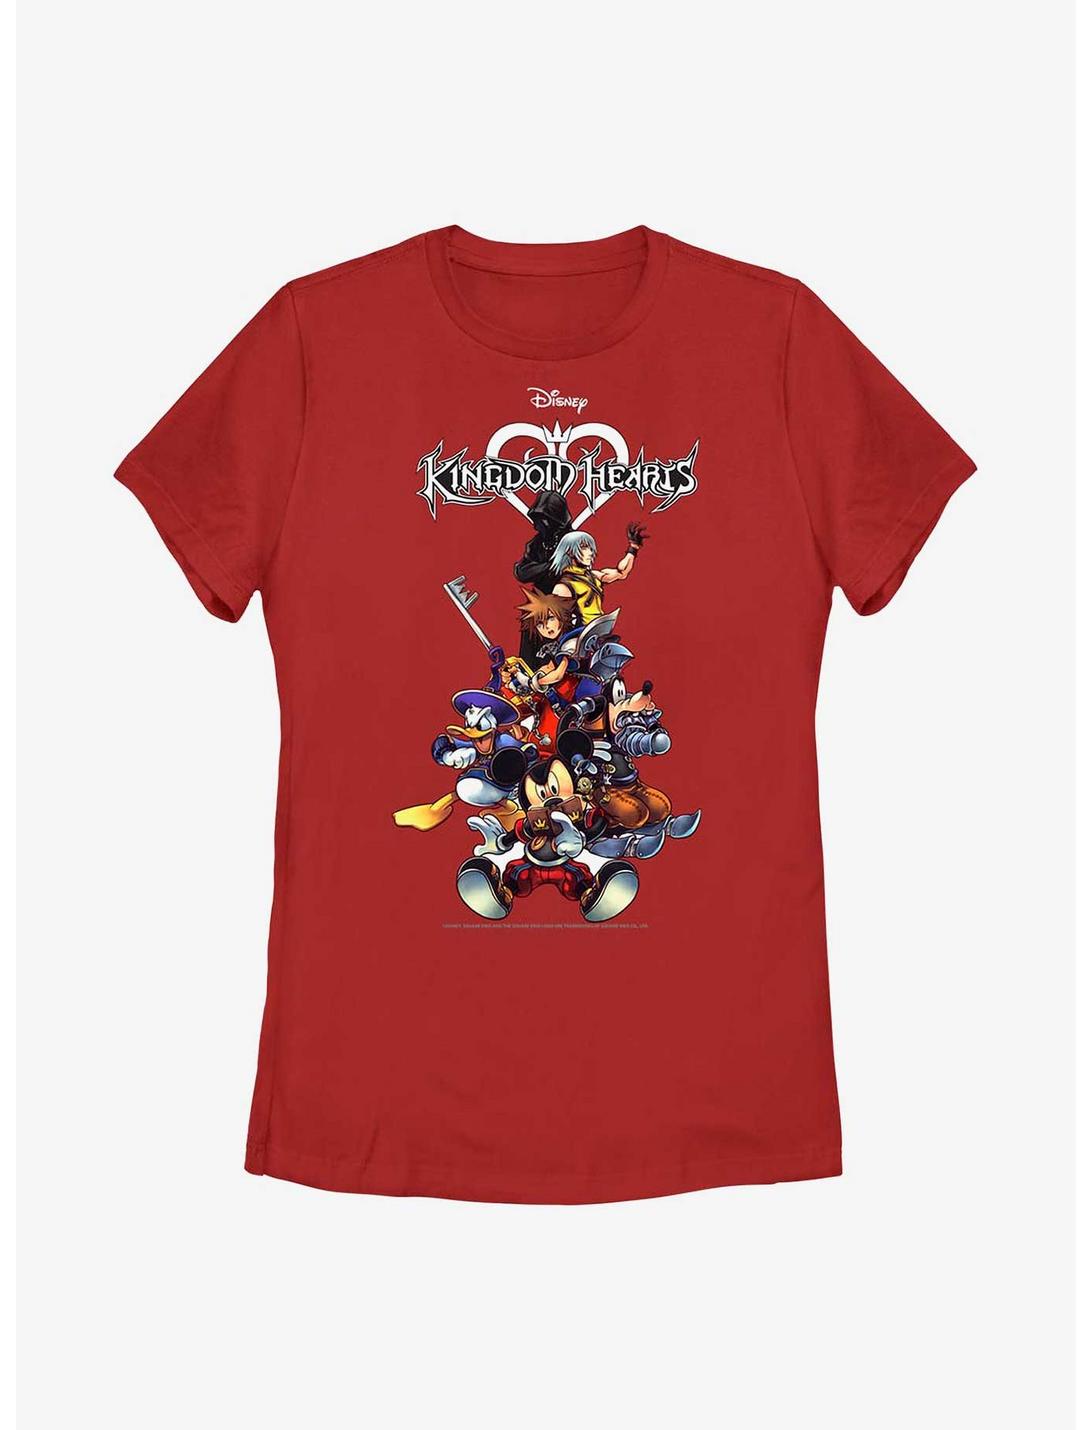 Disney Kingdom Hearts Group With Logo Womens T-Shirt, RED, hi-res